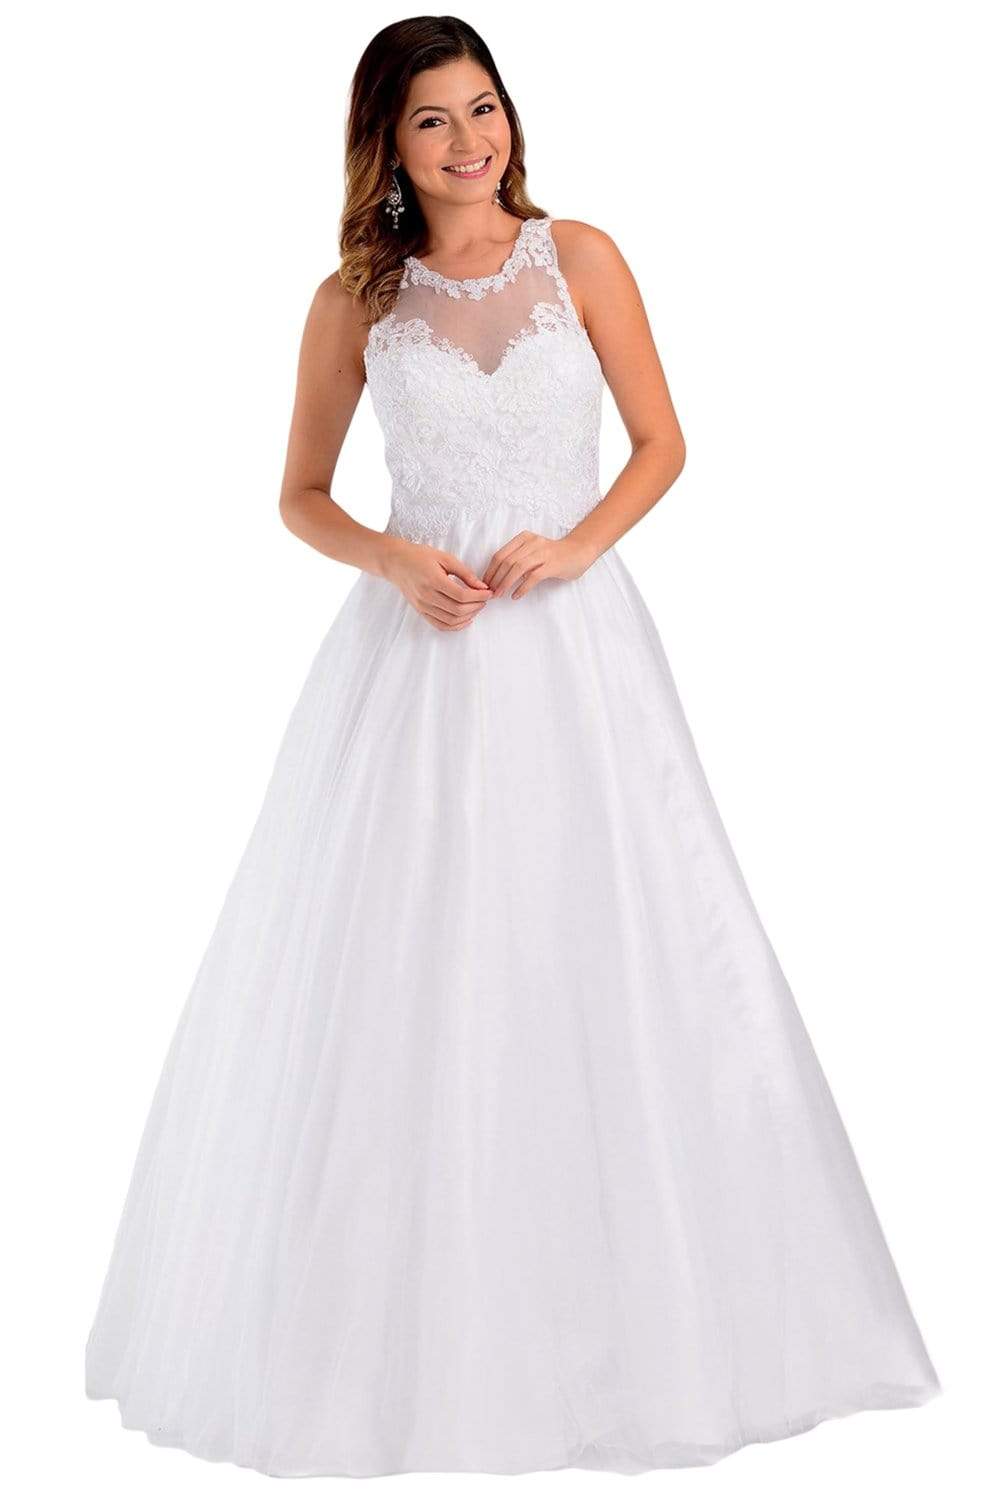 Poly USA - 7490 Embroidered Halter Tulle A-line Gown
